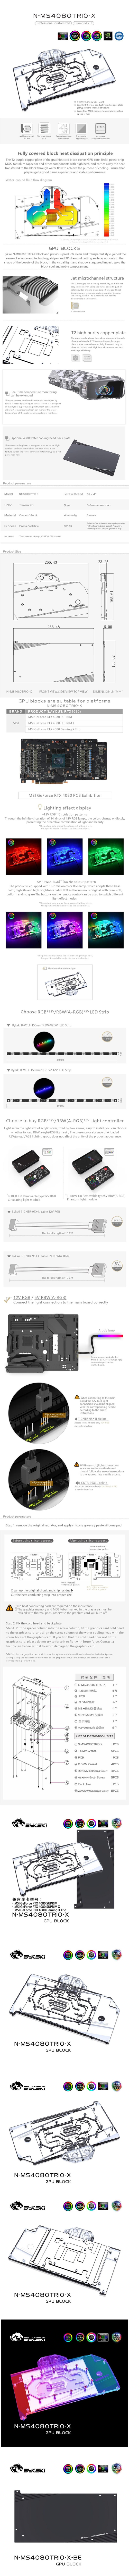 A large marketing image providing additional information about the product Bykski RTX 4080 RBW GPU Waterblock for MSI w/ Backplate - Additional alt info not provided